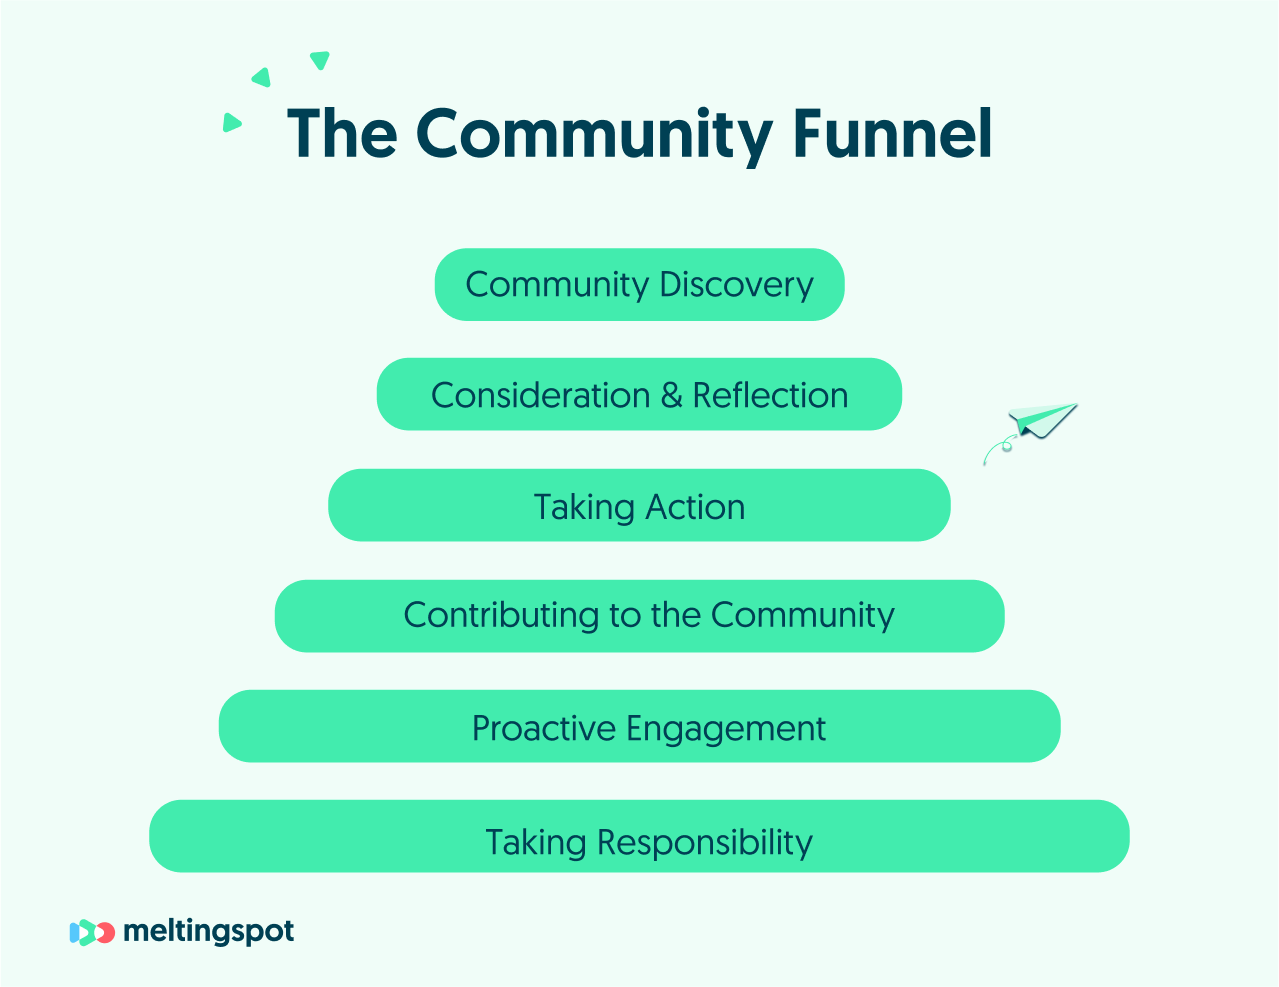 The Community funnel